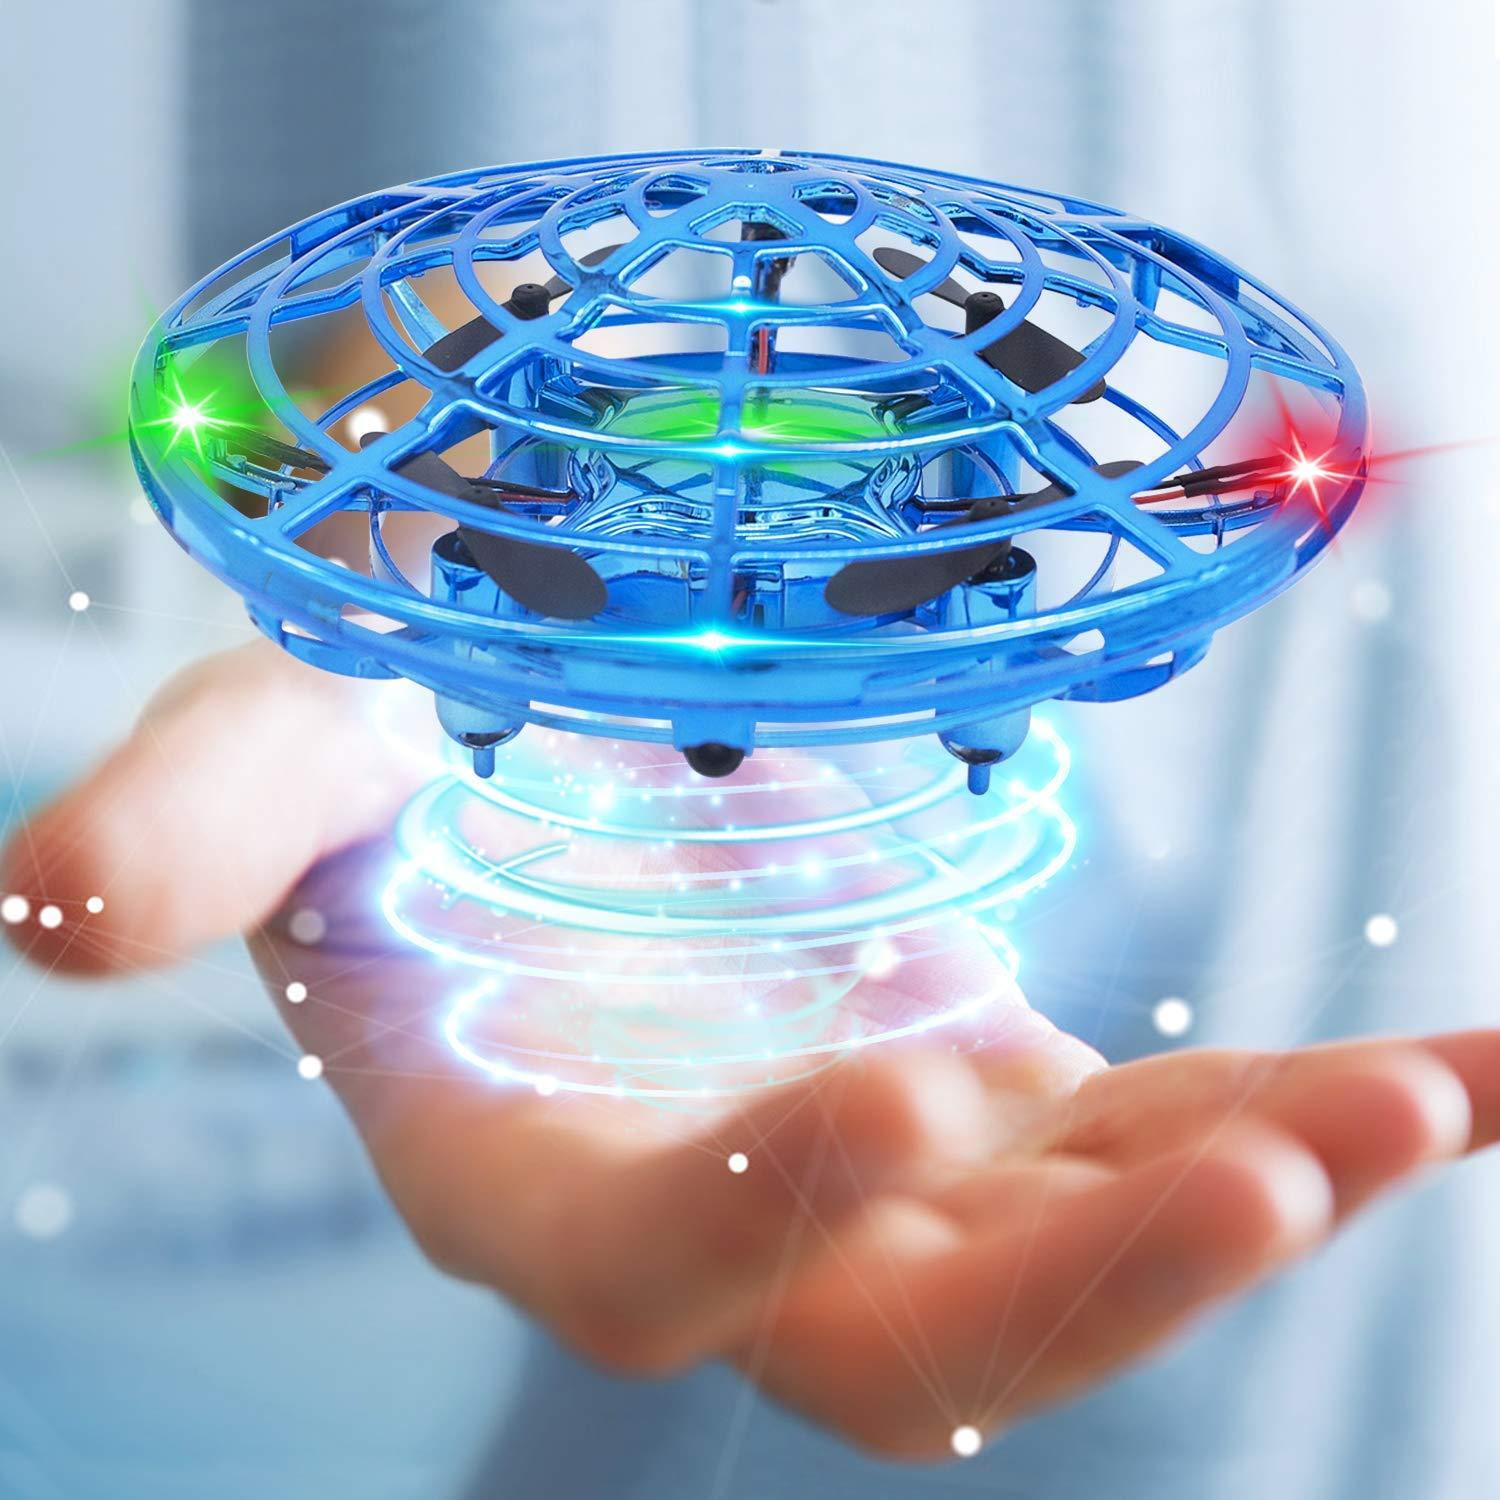 2-Speed Interactive Flying Orb Upgraded 5 Infrared Sensors Red TMANGO UFO Hand-Controlled Mini Drones Toys Boys & Girls 360°Rotating Flying Ball with LED Light for Kids